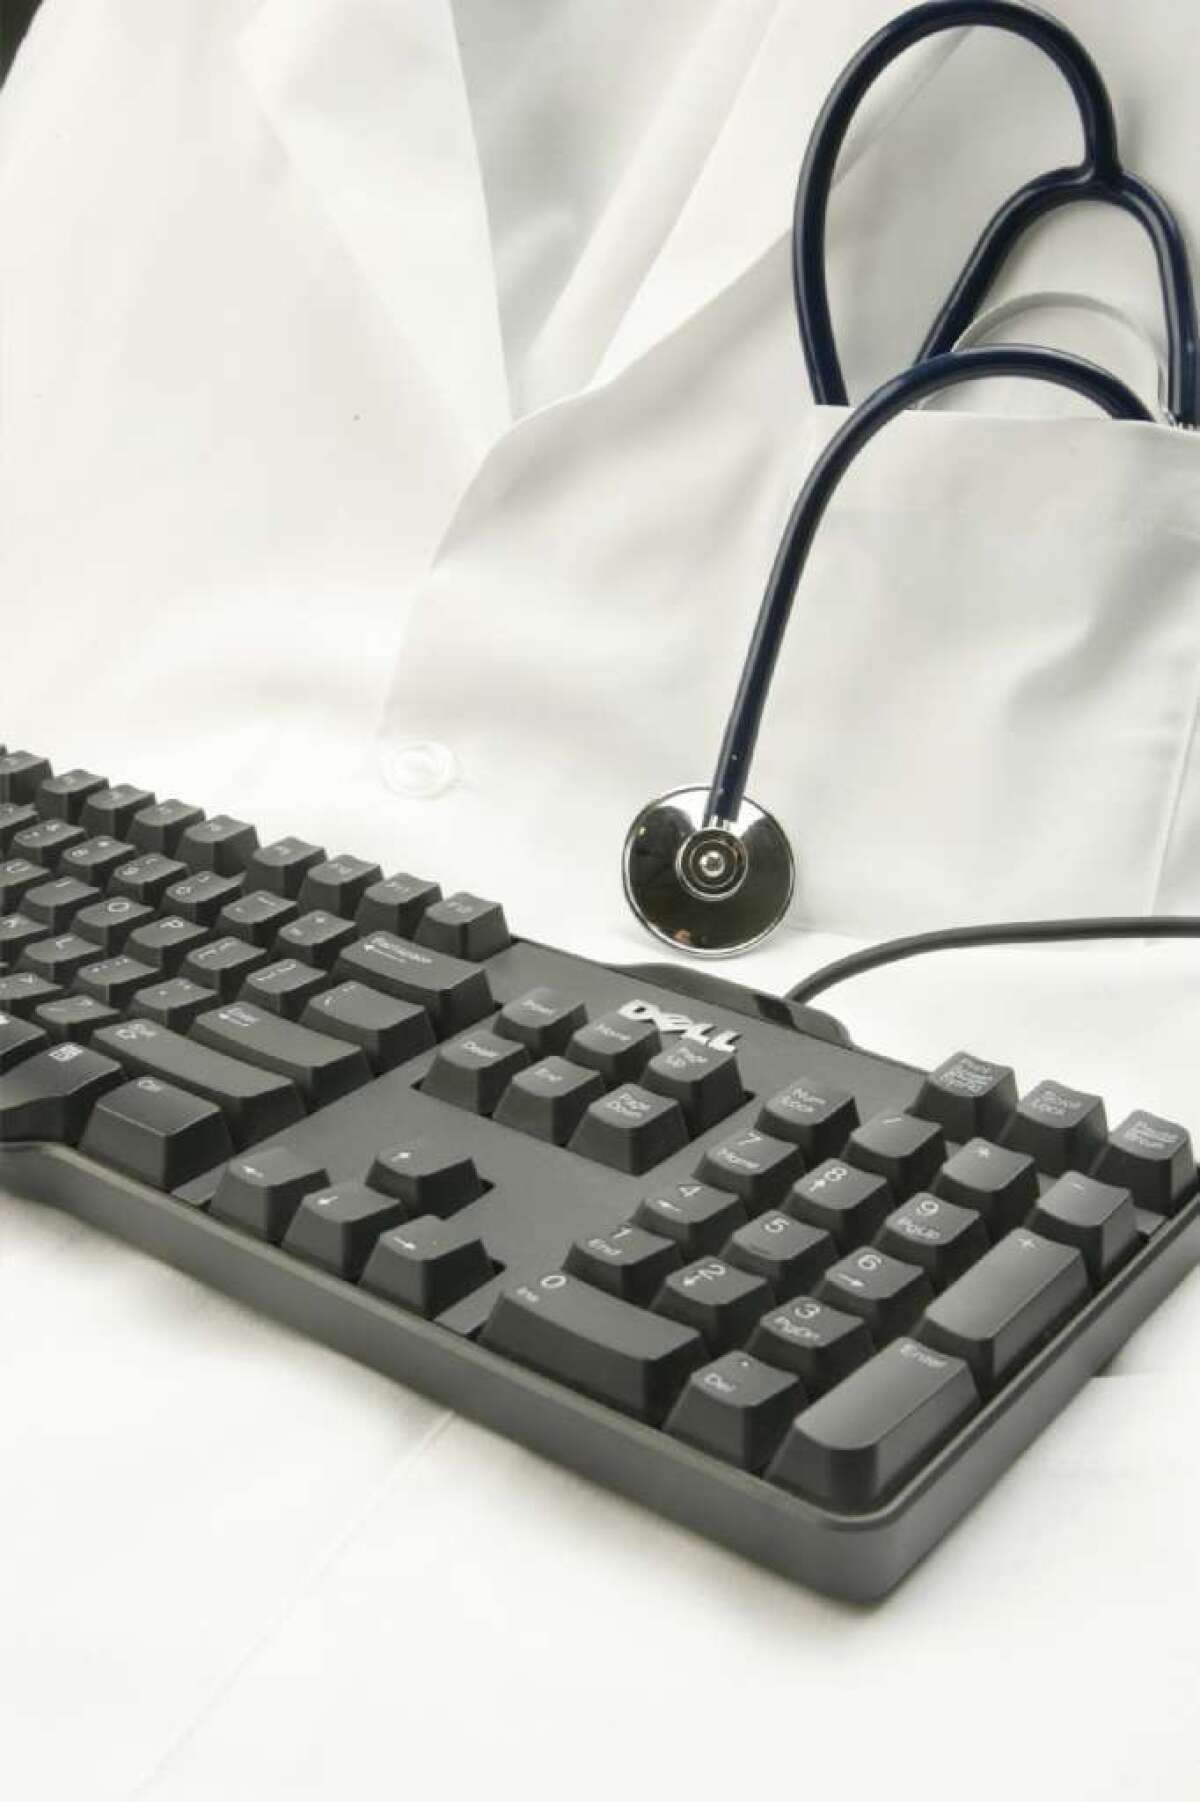 A computer system beat doctors at recording patient histories and symptoms, a study found.